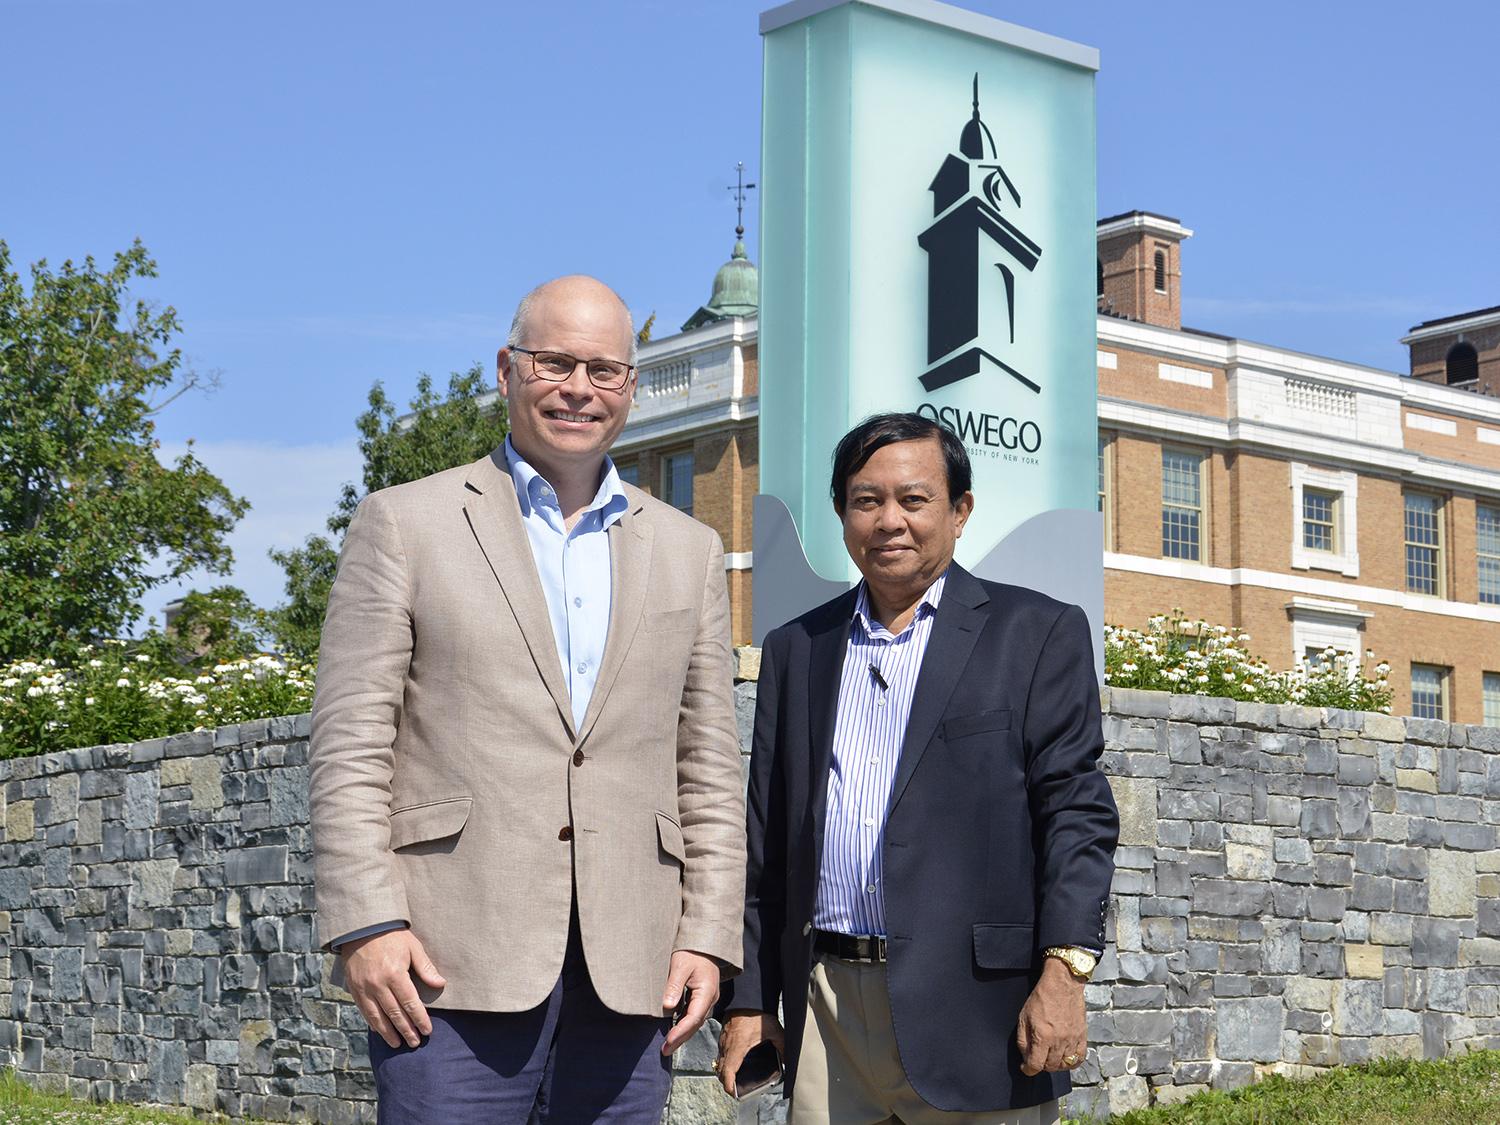 Dr. Joshua McKeown (left), director of SUNY Oswego's Office of International Education and Programs, mentors physician and educator Dr. Myint Oo, who recently traveled from Myanmar to learn more about fostering international education opportunities